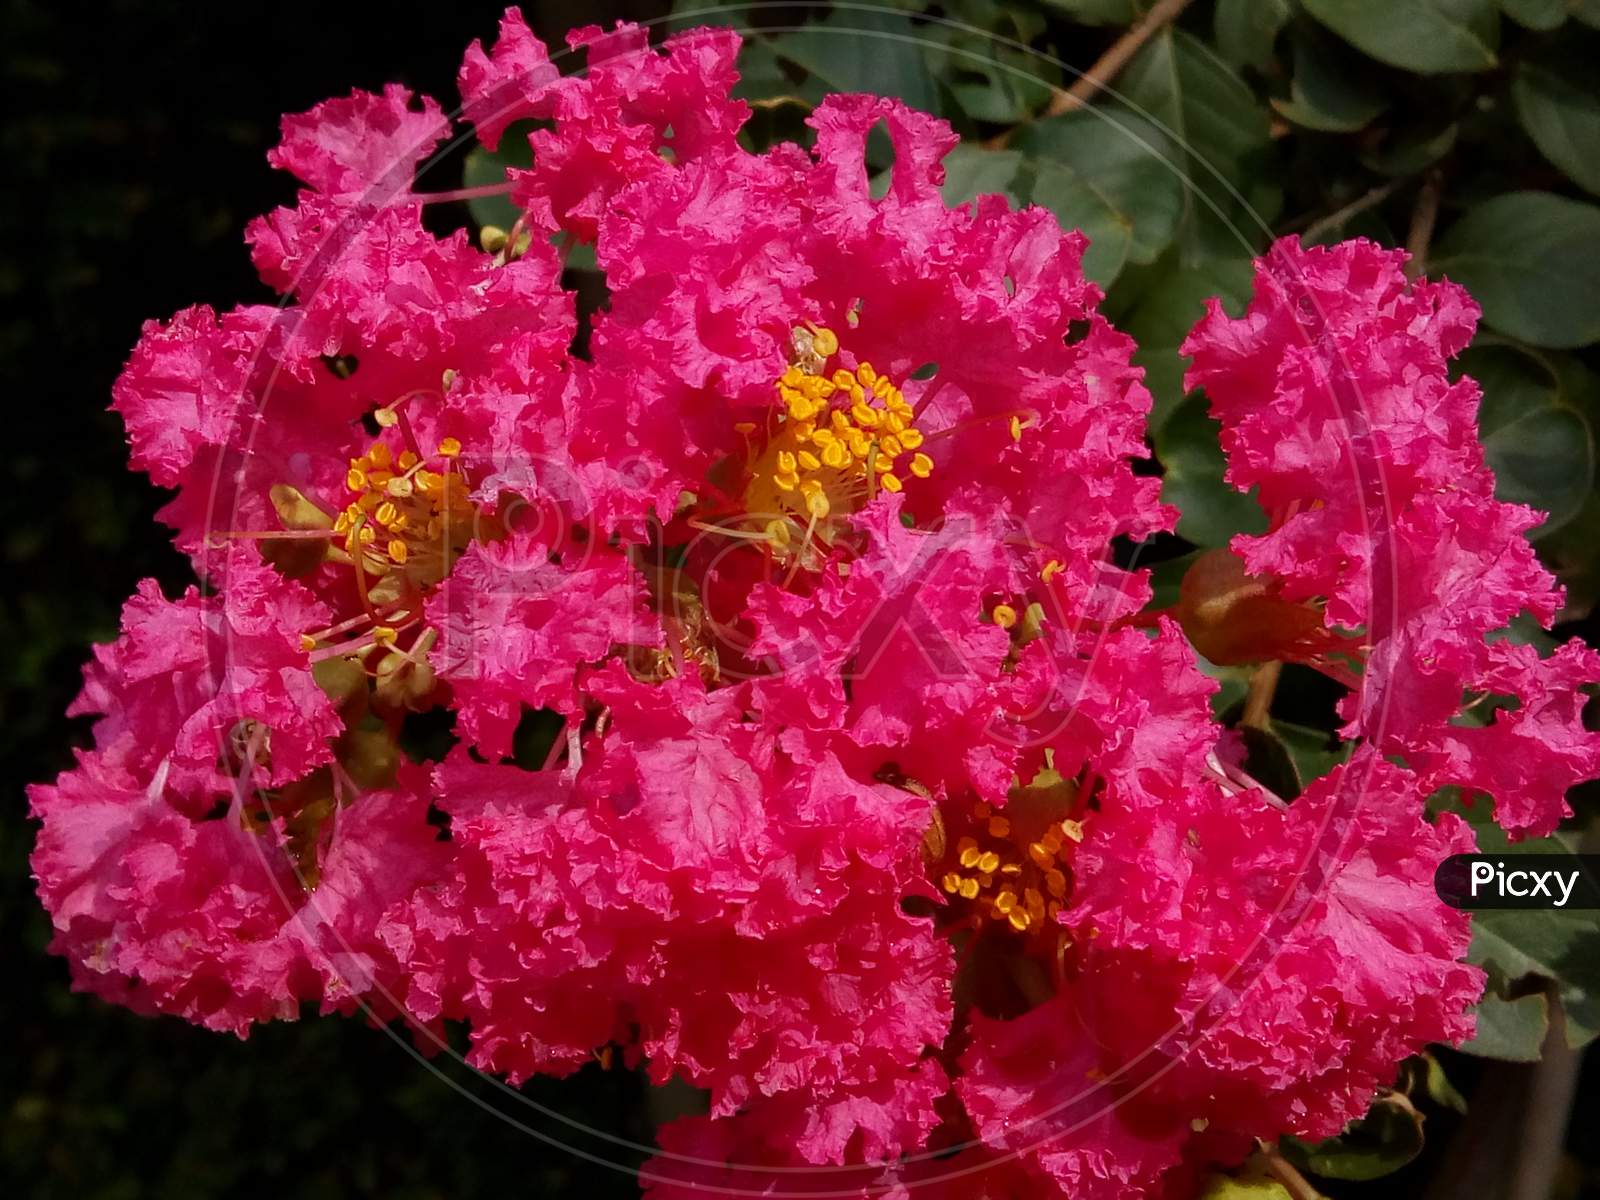 Awesome pink flowers